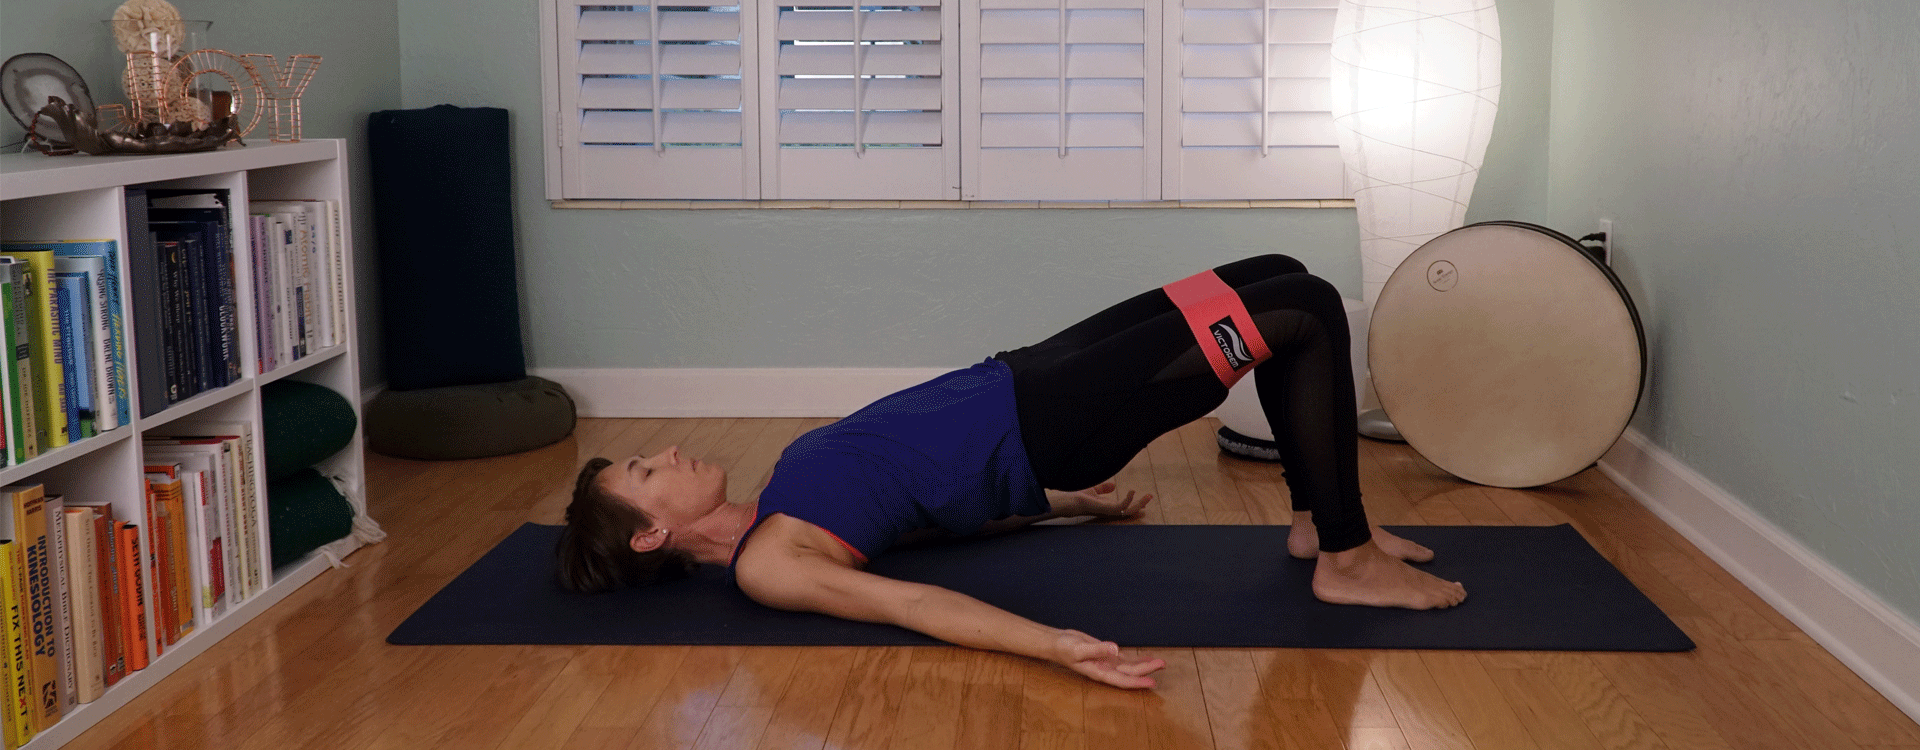 swagtail-yoga-hip-stability-banner